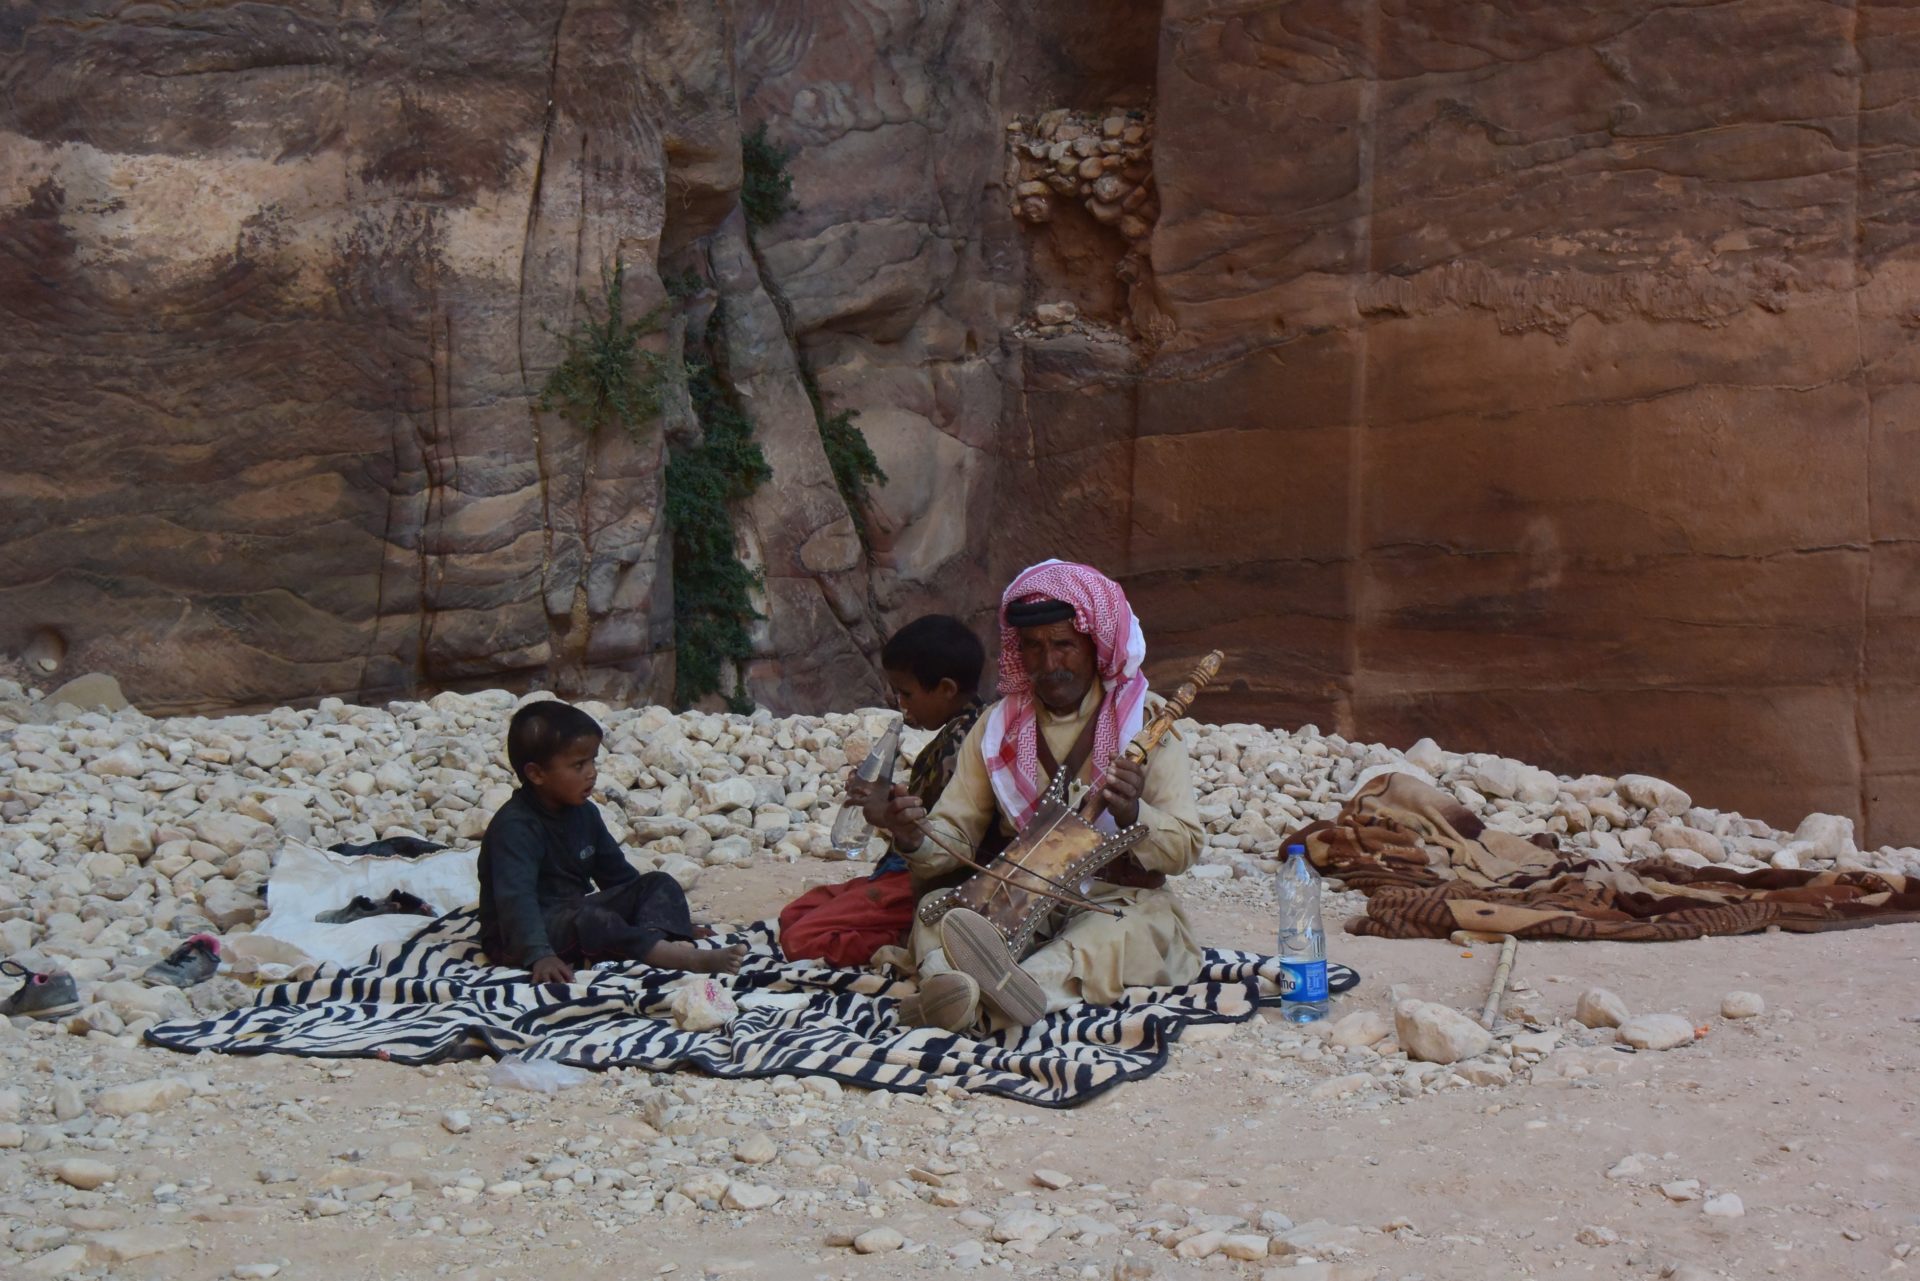 a man and boy sitting on a blanket playing music